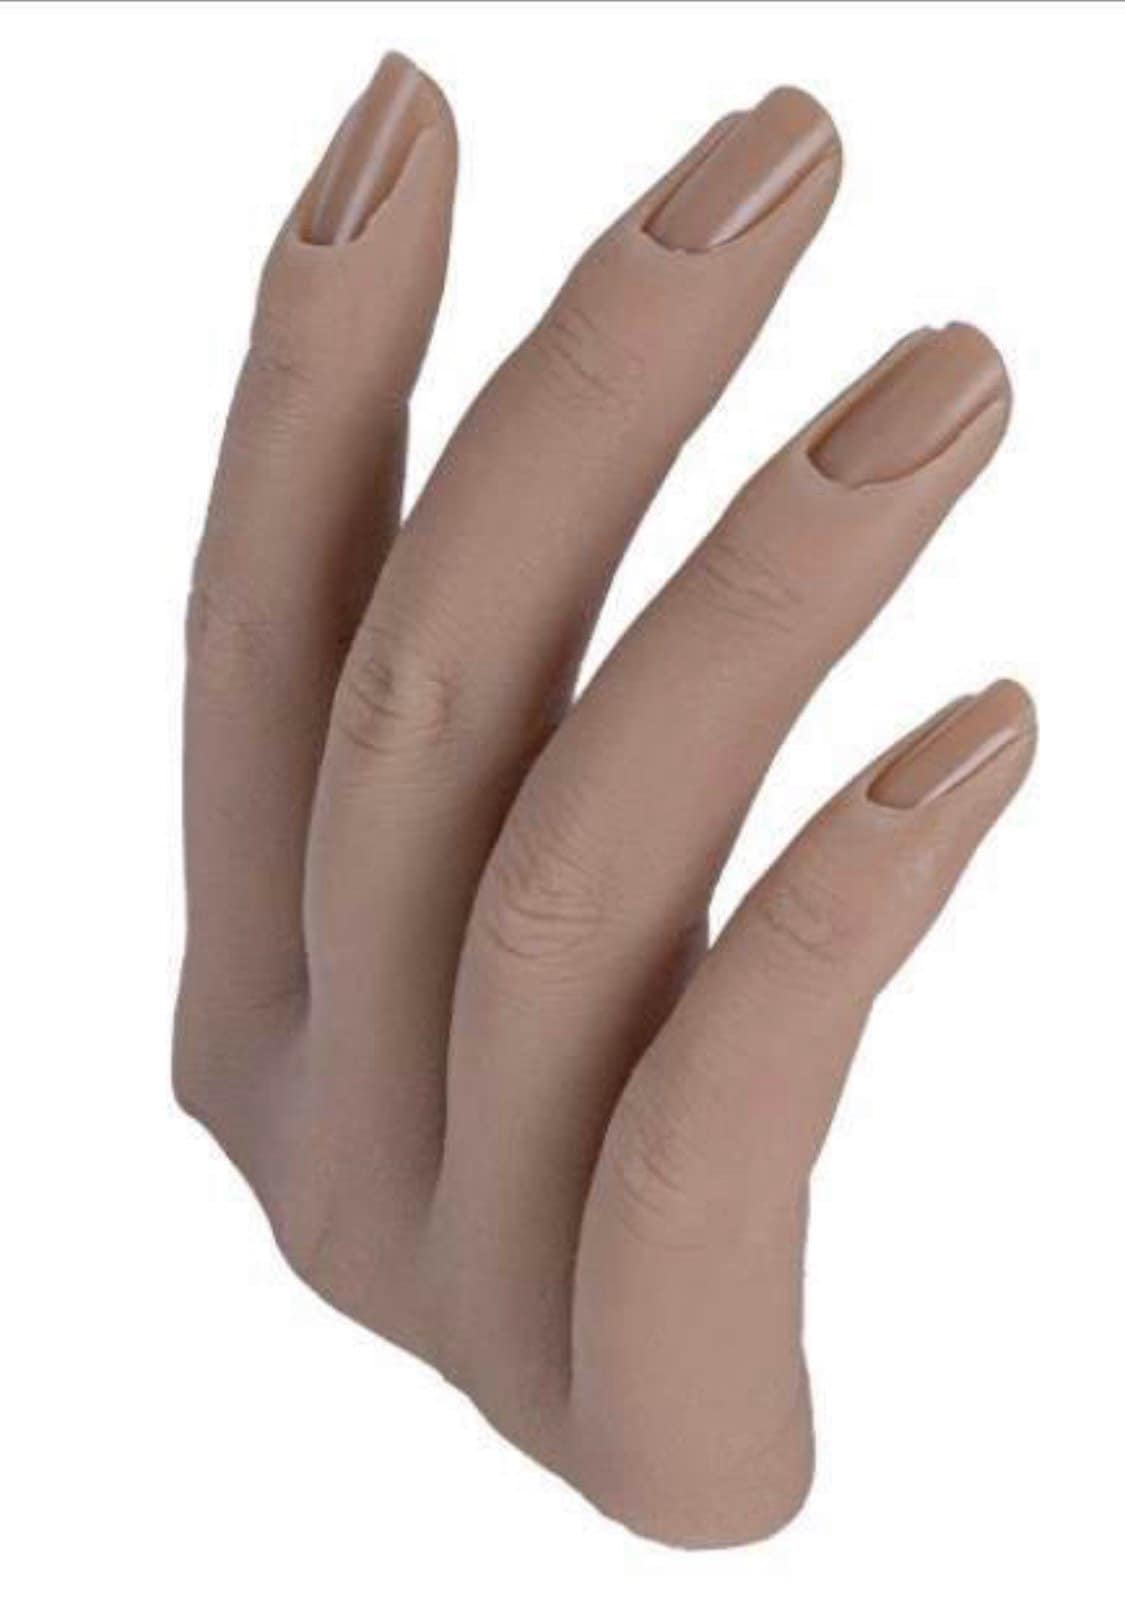 Professional Silicone Nail Art Practice Hands, Ten Finger Fake Hands - Left  Hand & Right Hand for Drawing, Sketching, Painting